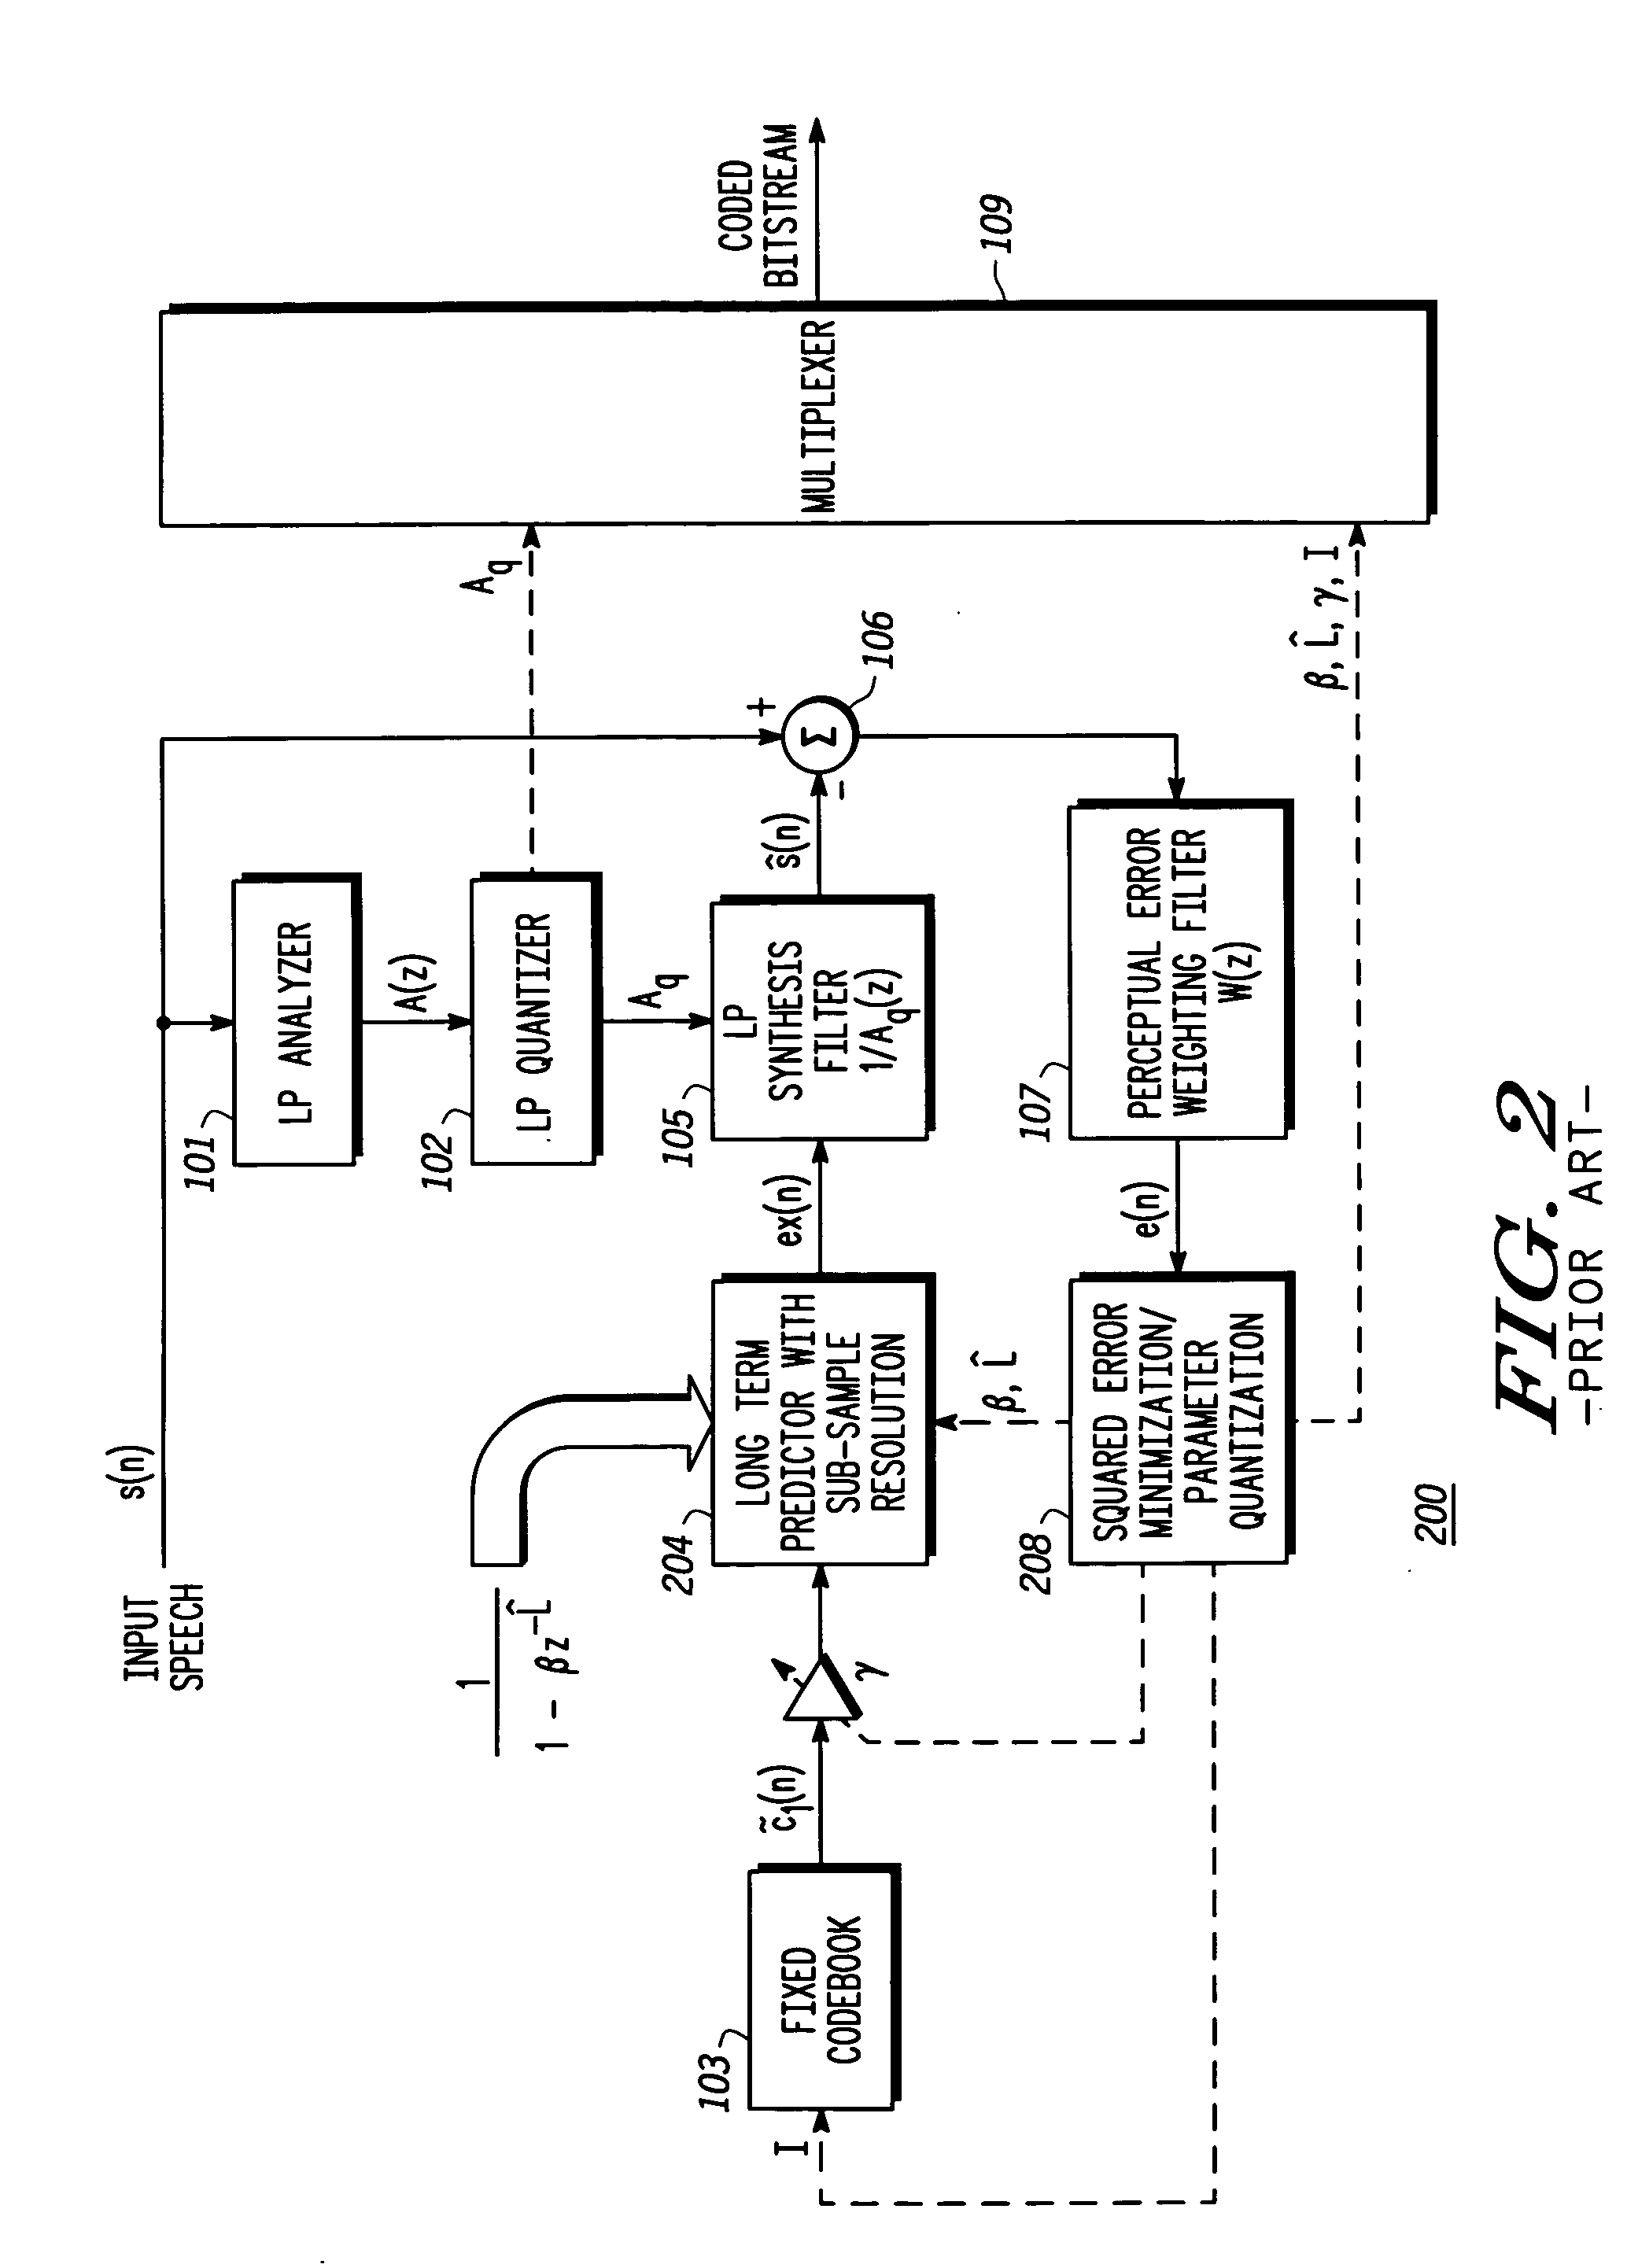 Method and apparatus for speech coding